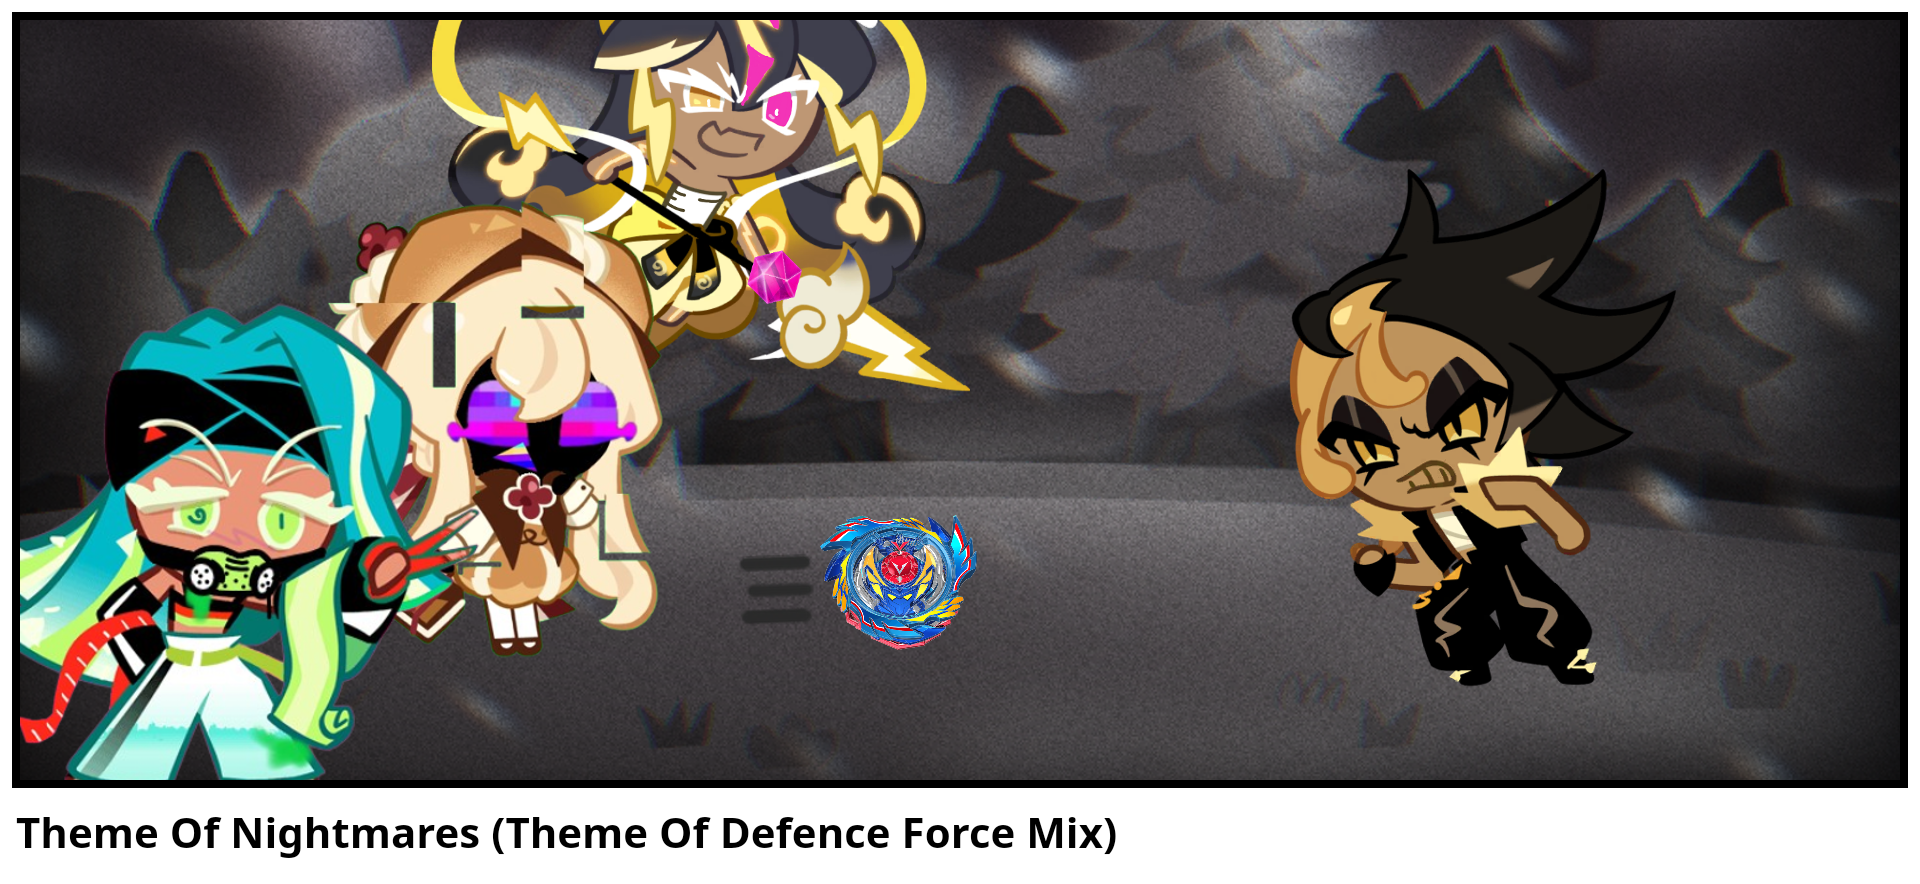 Theme Of Nightmares (Theme Of Defence Force Mix)